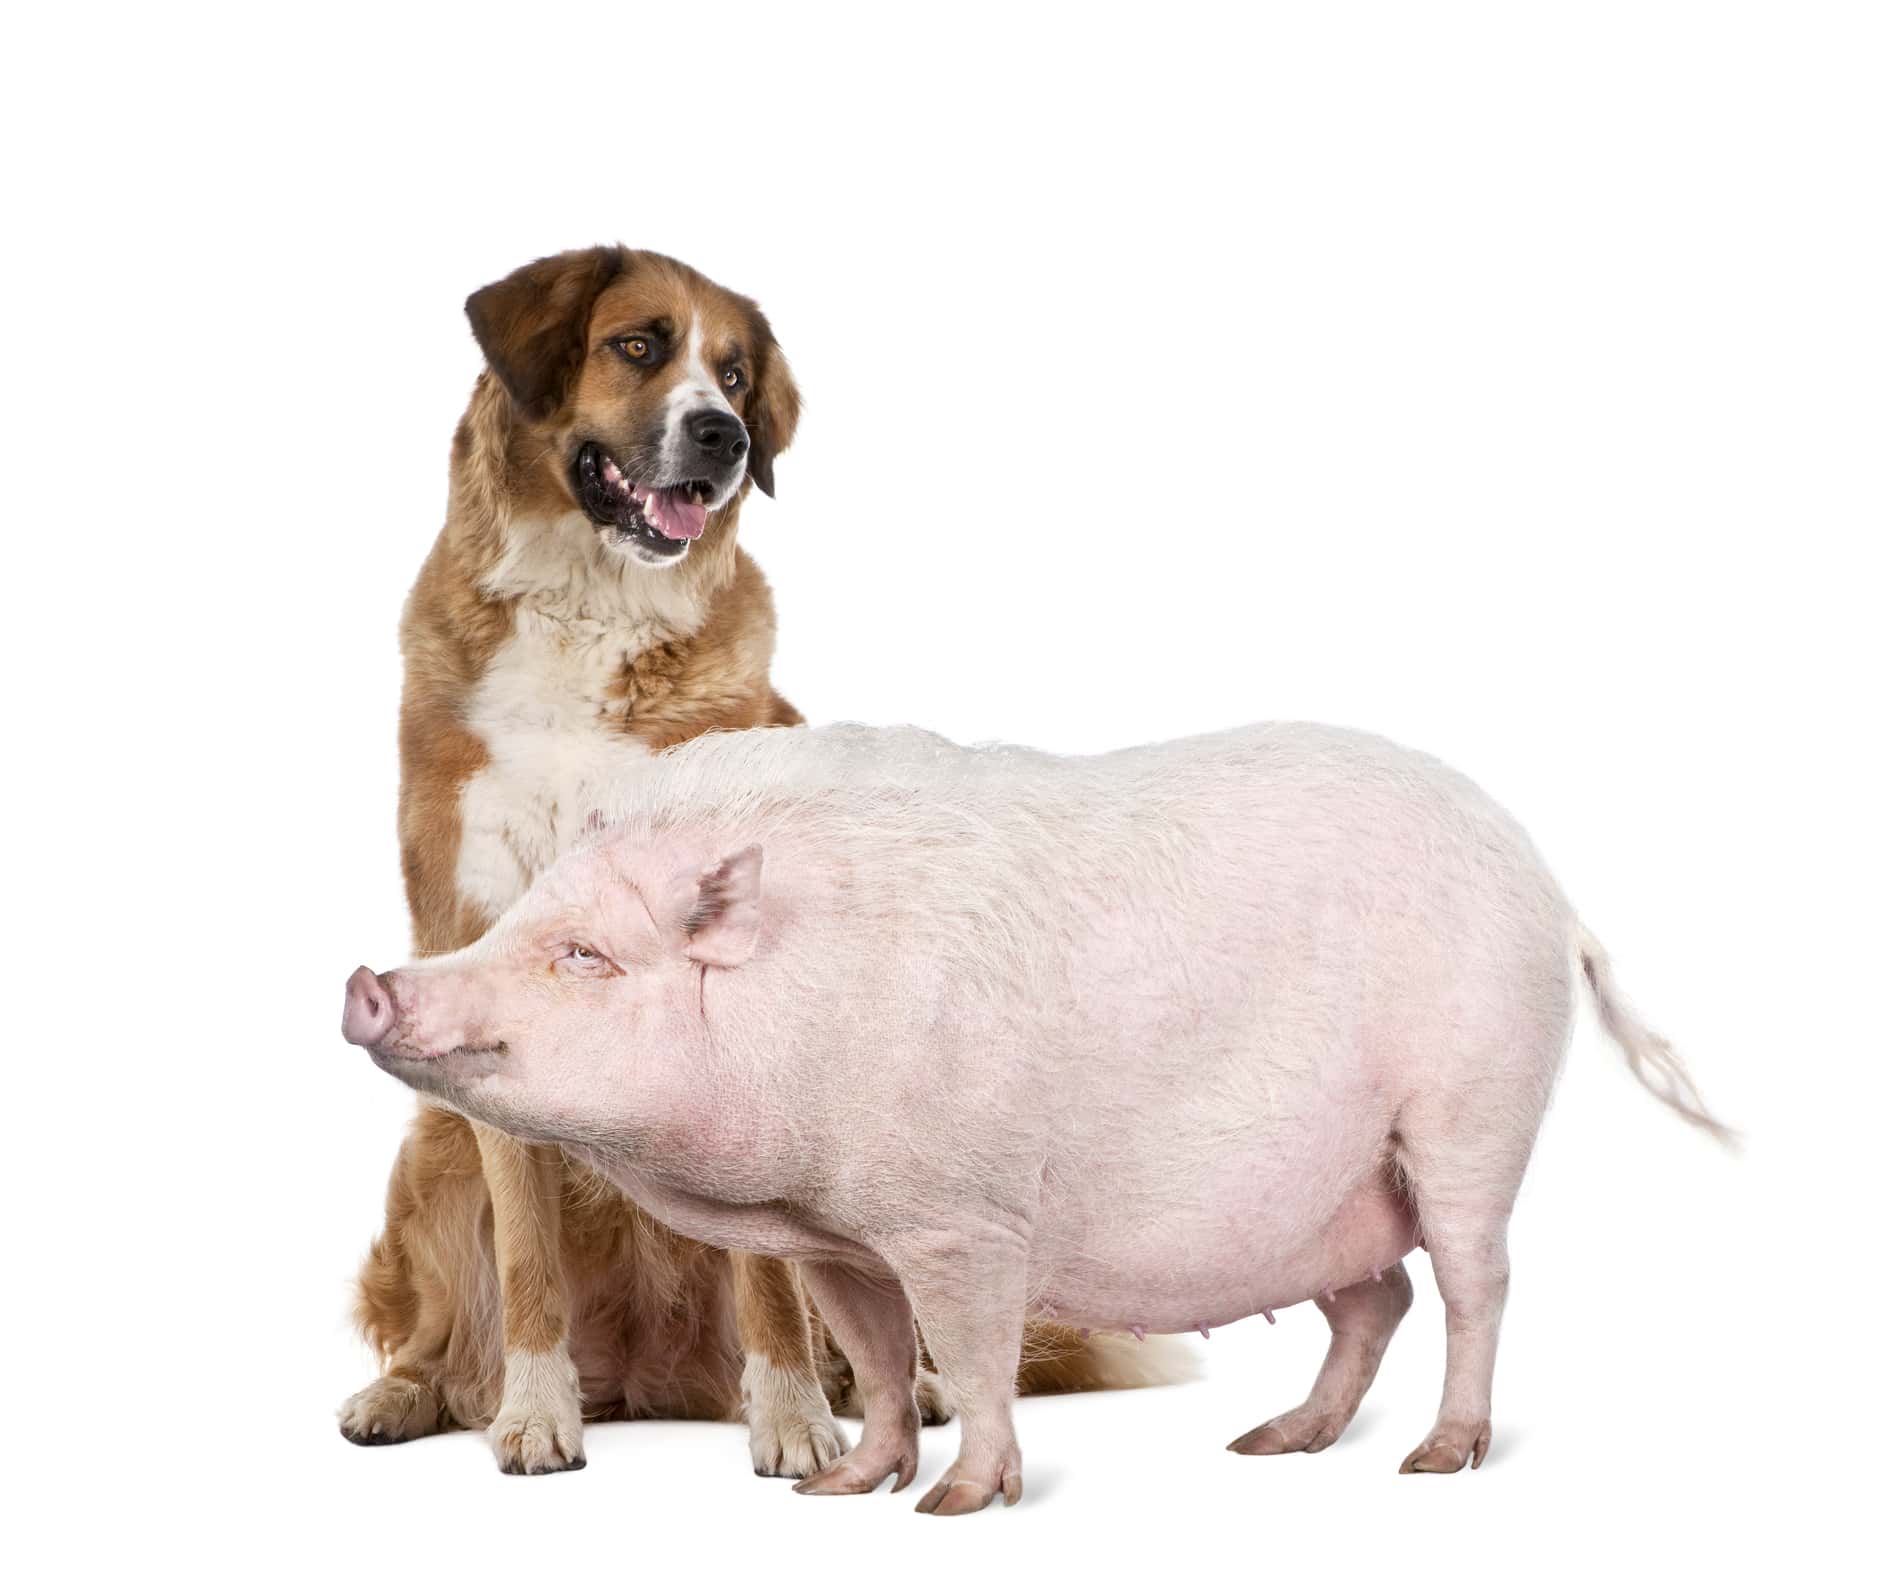 Gottingen minipig and dog standing in front of white background